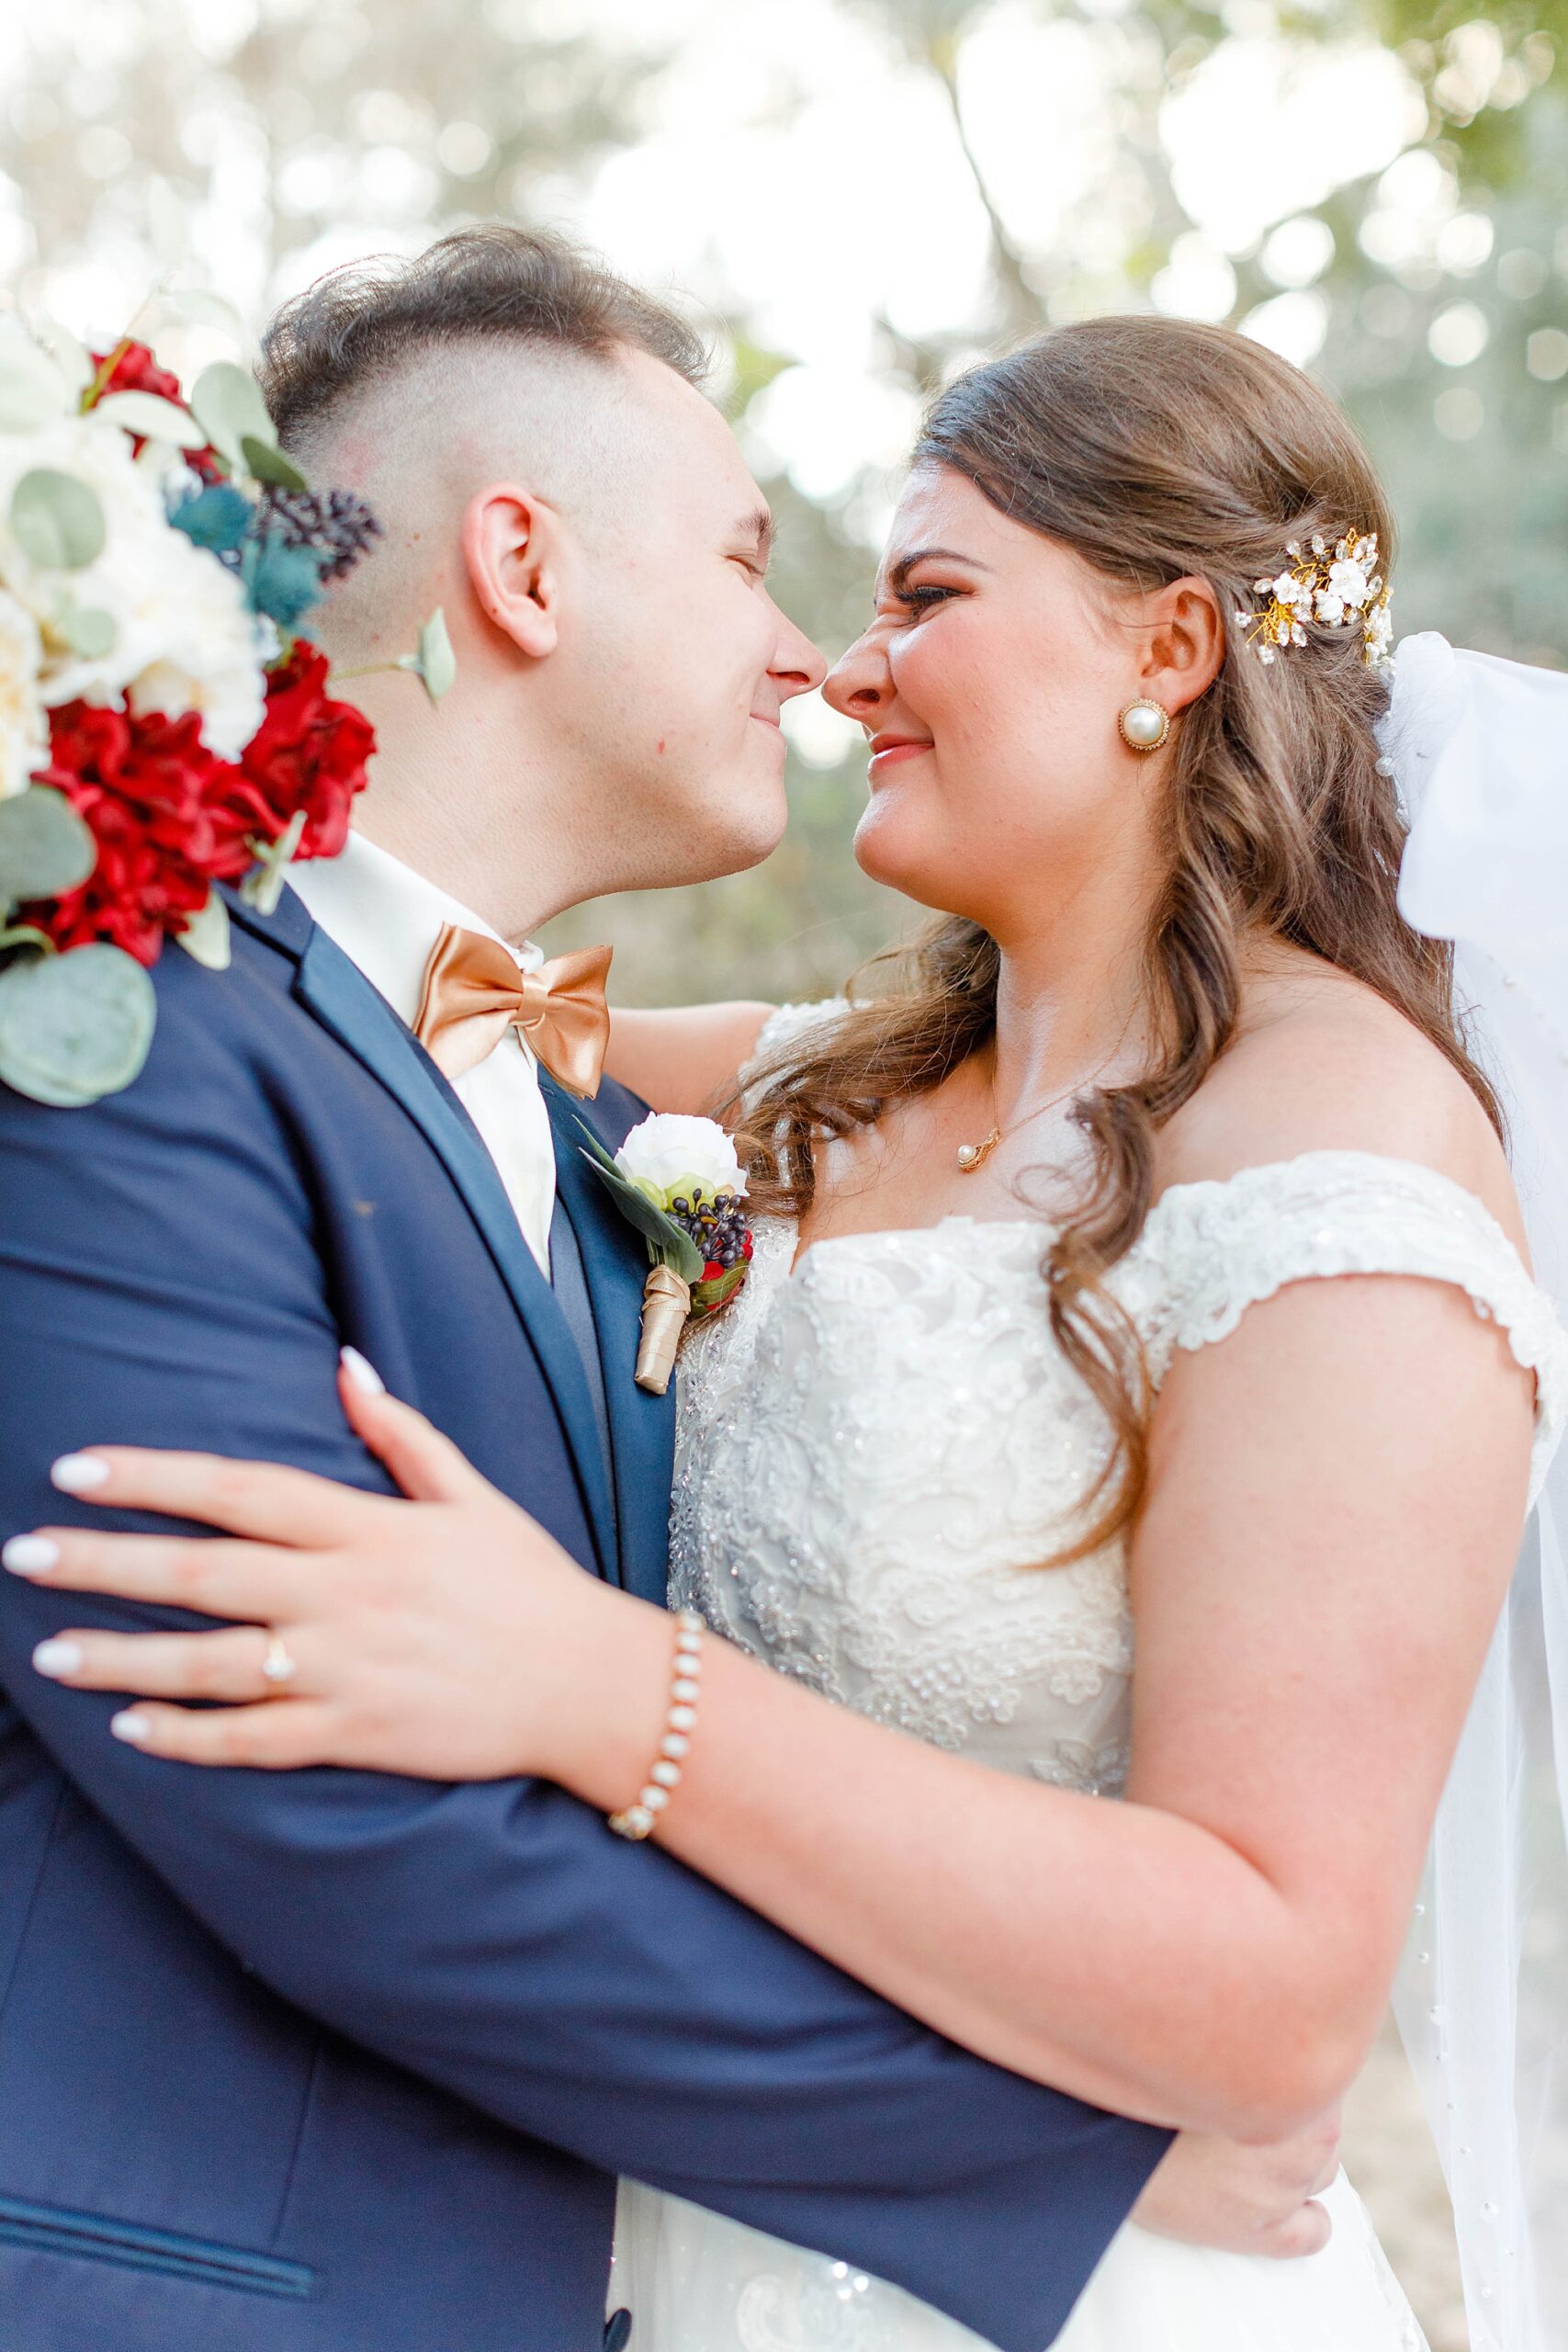 Romantic Wedding portraits from spring wedding in Baton Rouge